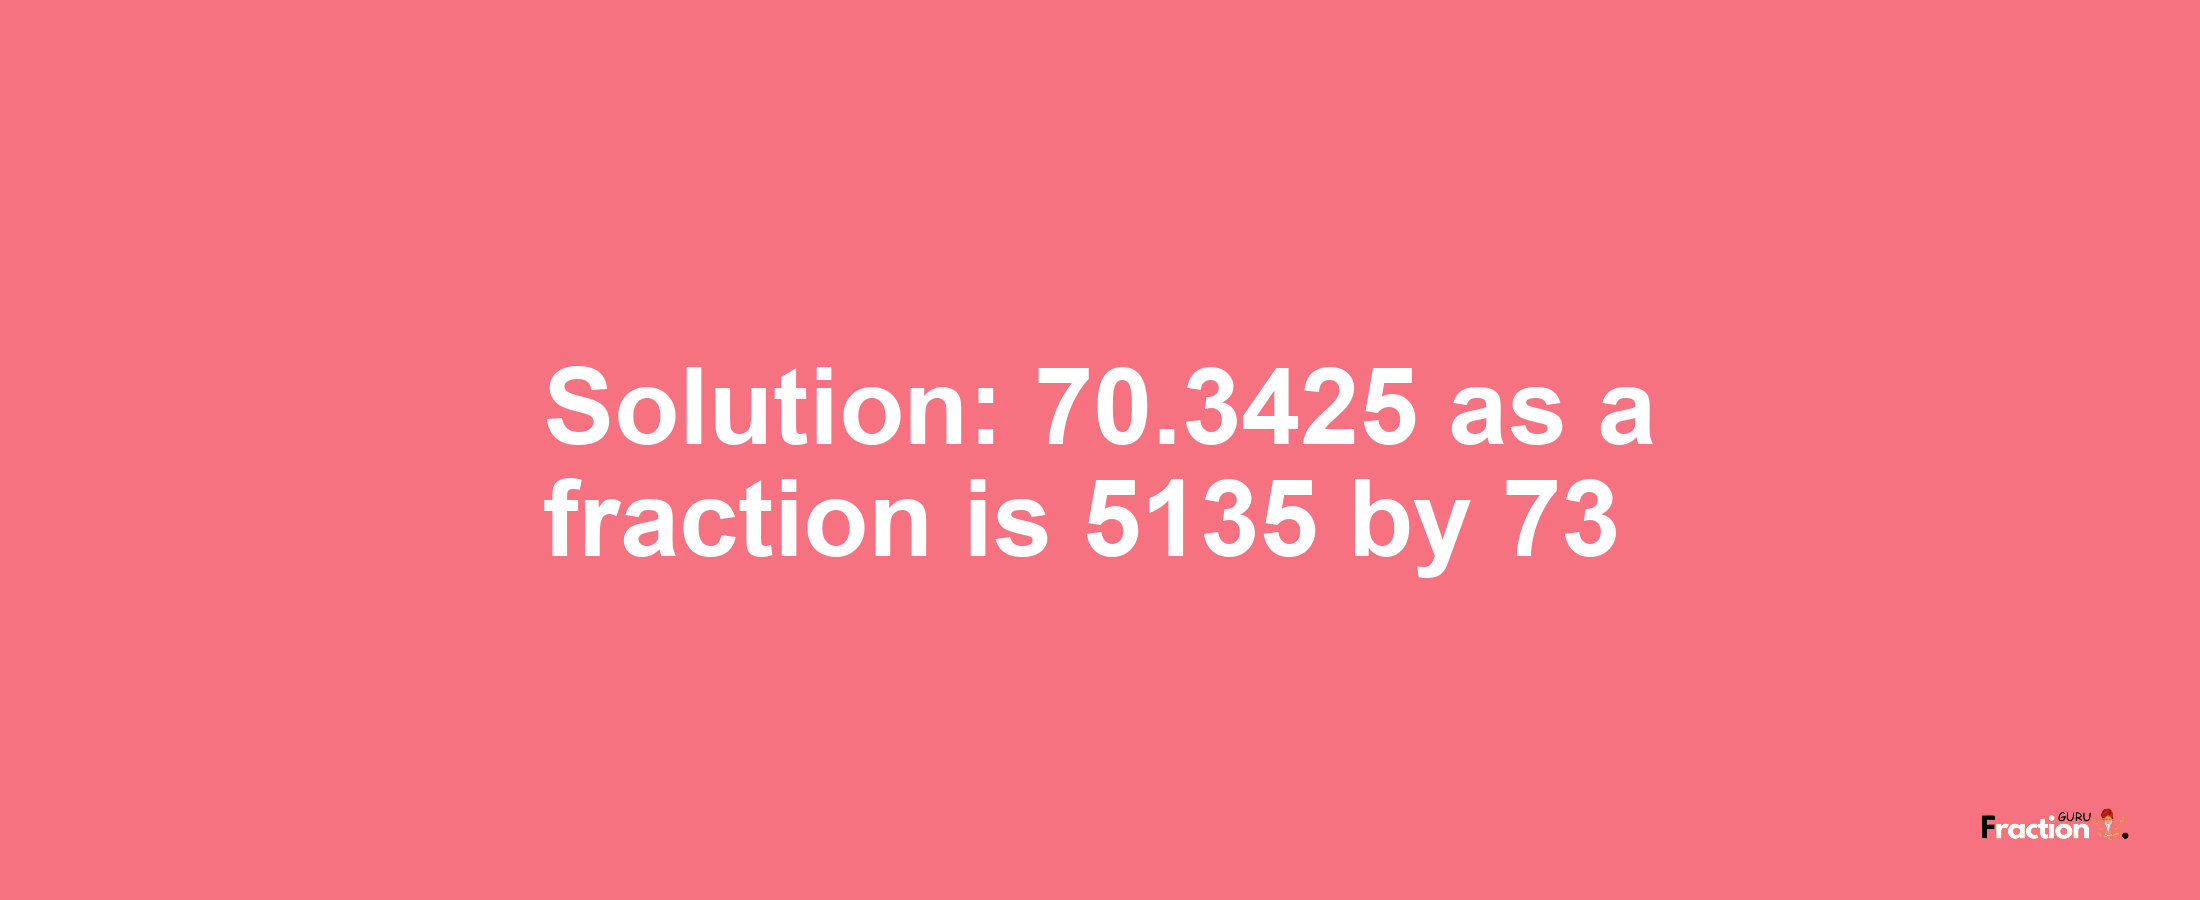 Solution:70.3425 as a fraction is 5135/73